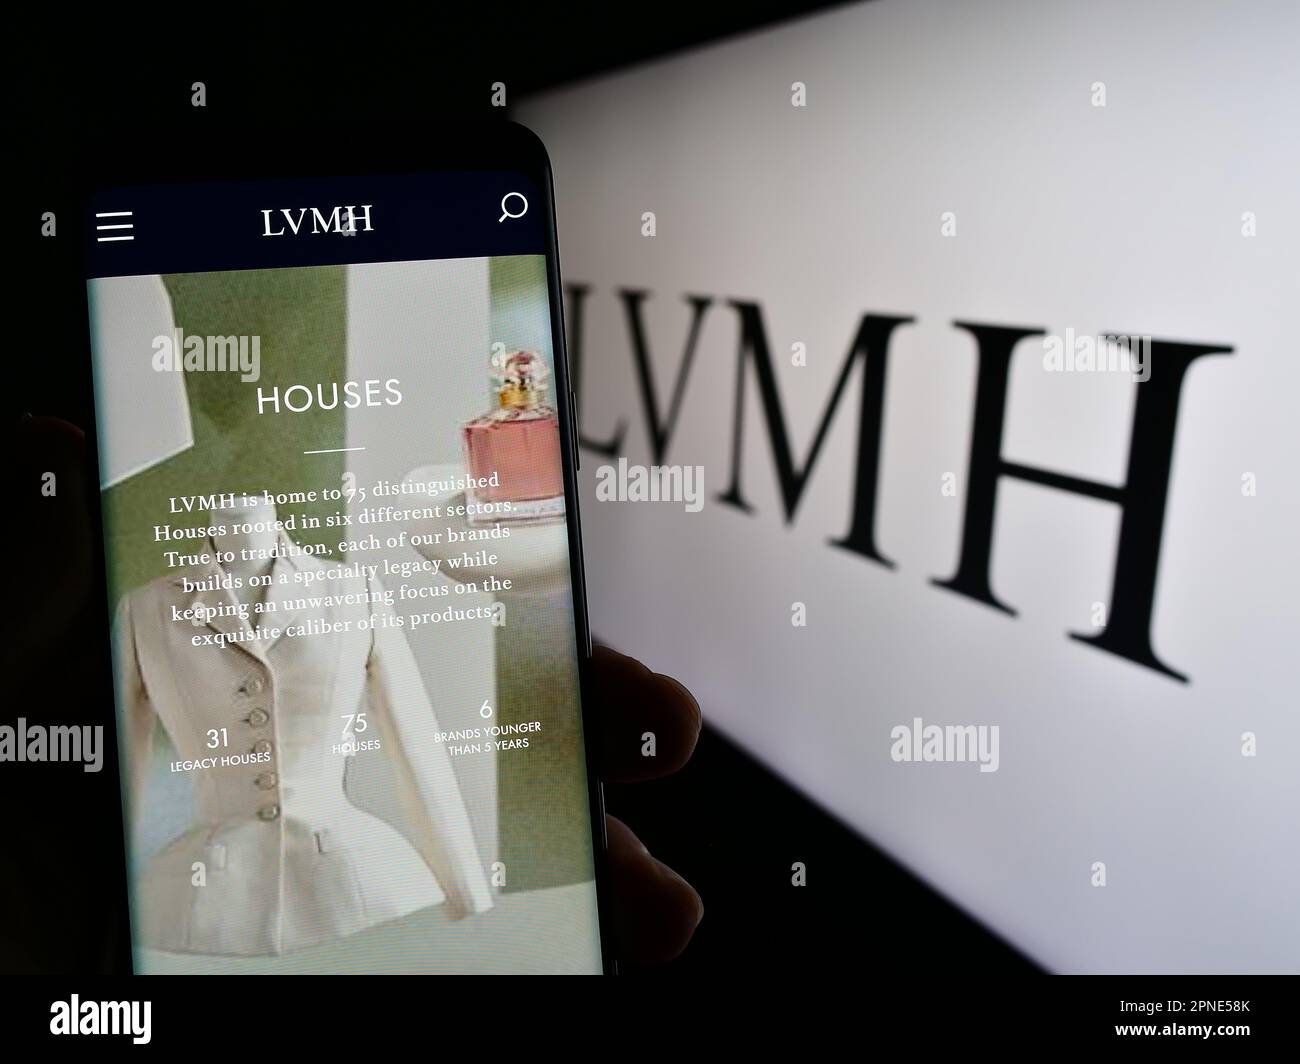 Person holding cellphone with webpage of company LVMH Moet Hennessy Louis Vuitton SE on screen in front of logo. Focus on center of phone display. Stock Photo